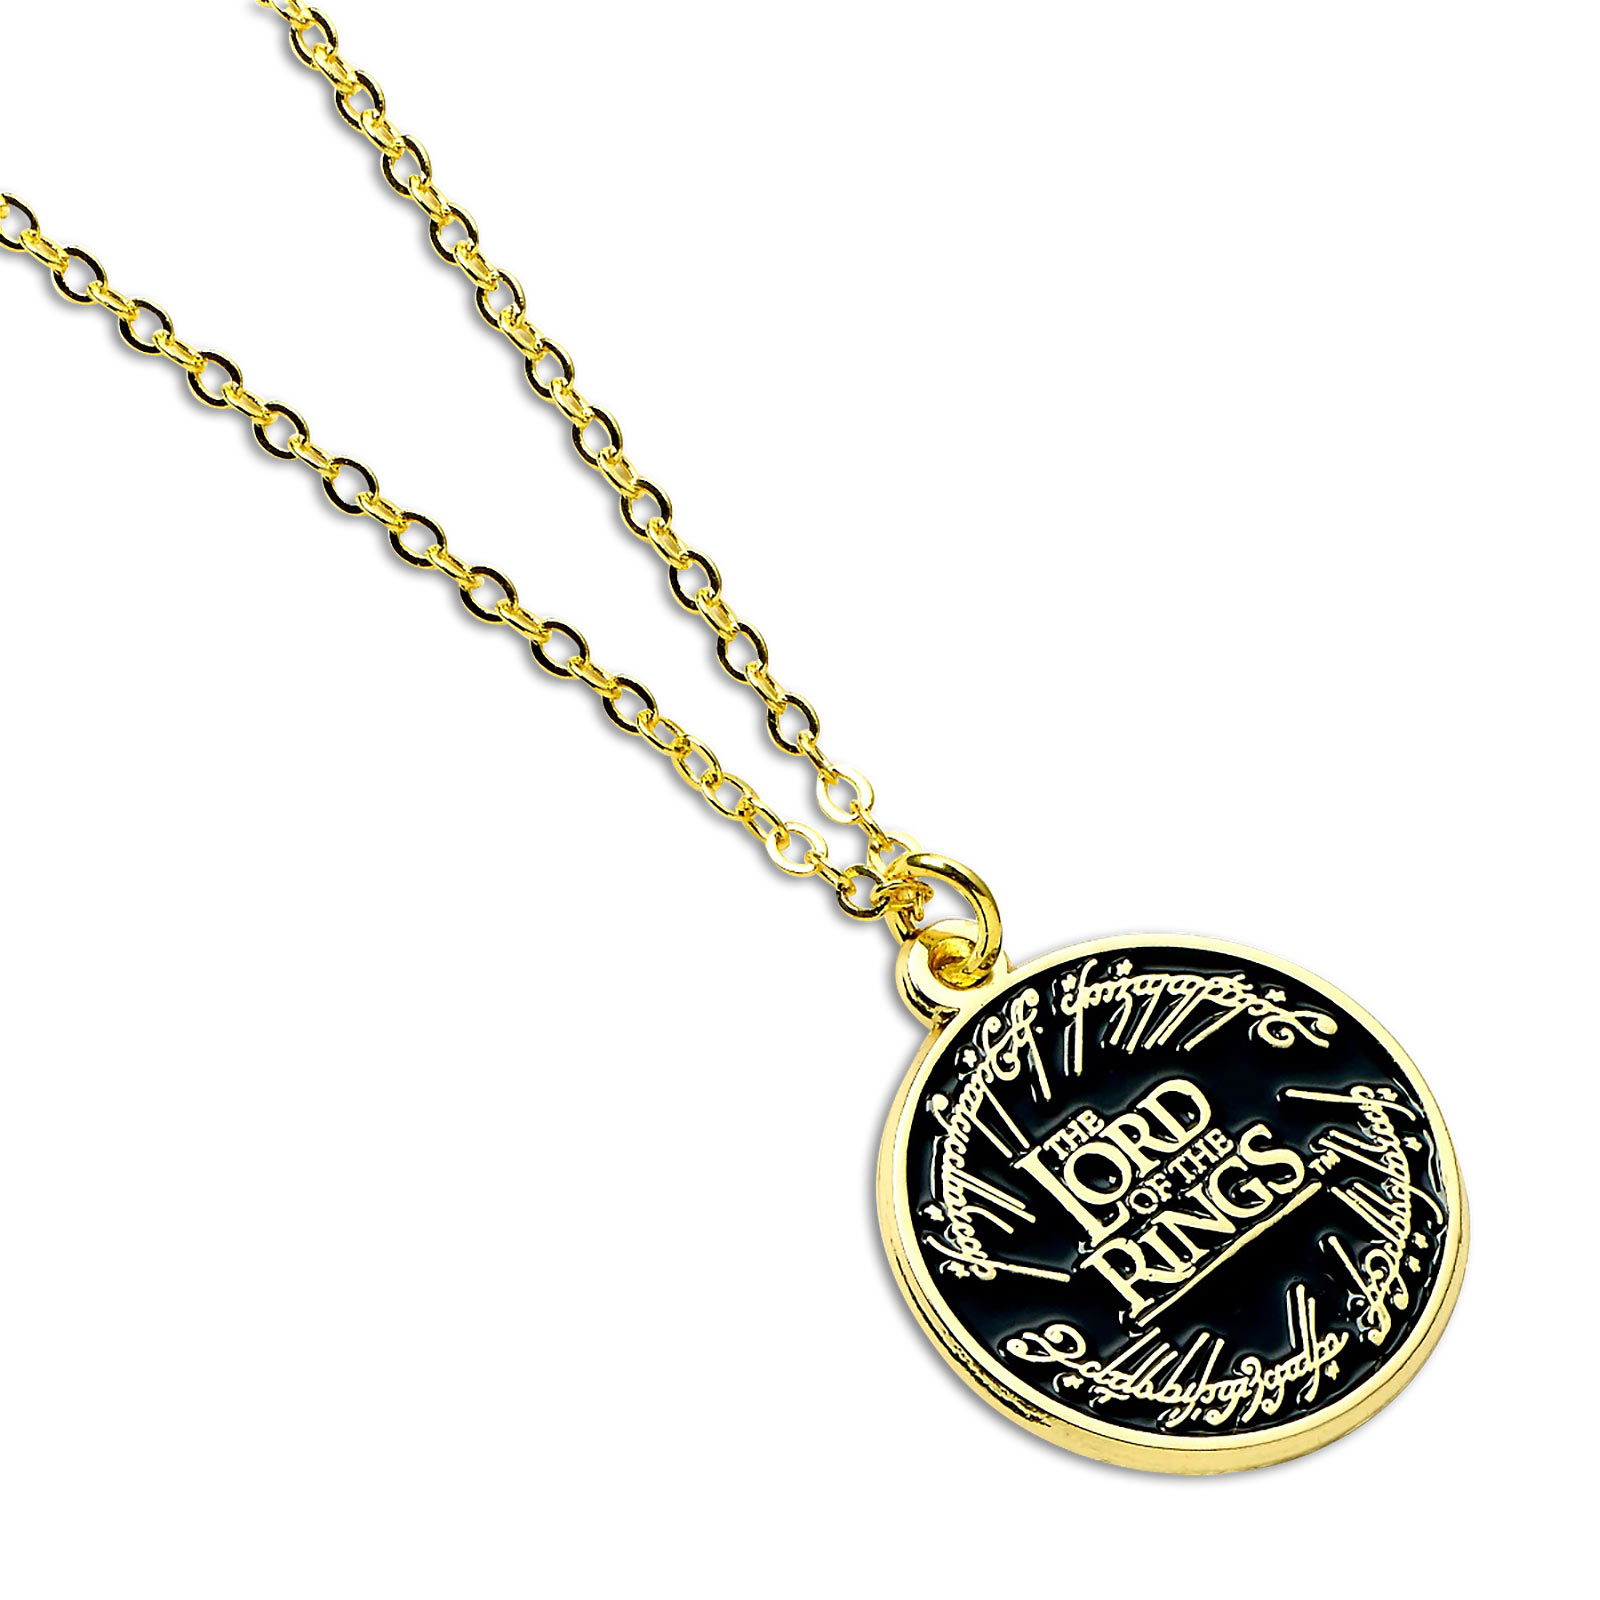 The One Ring Necklace - Lord of the Rings